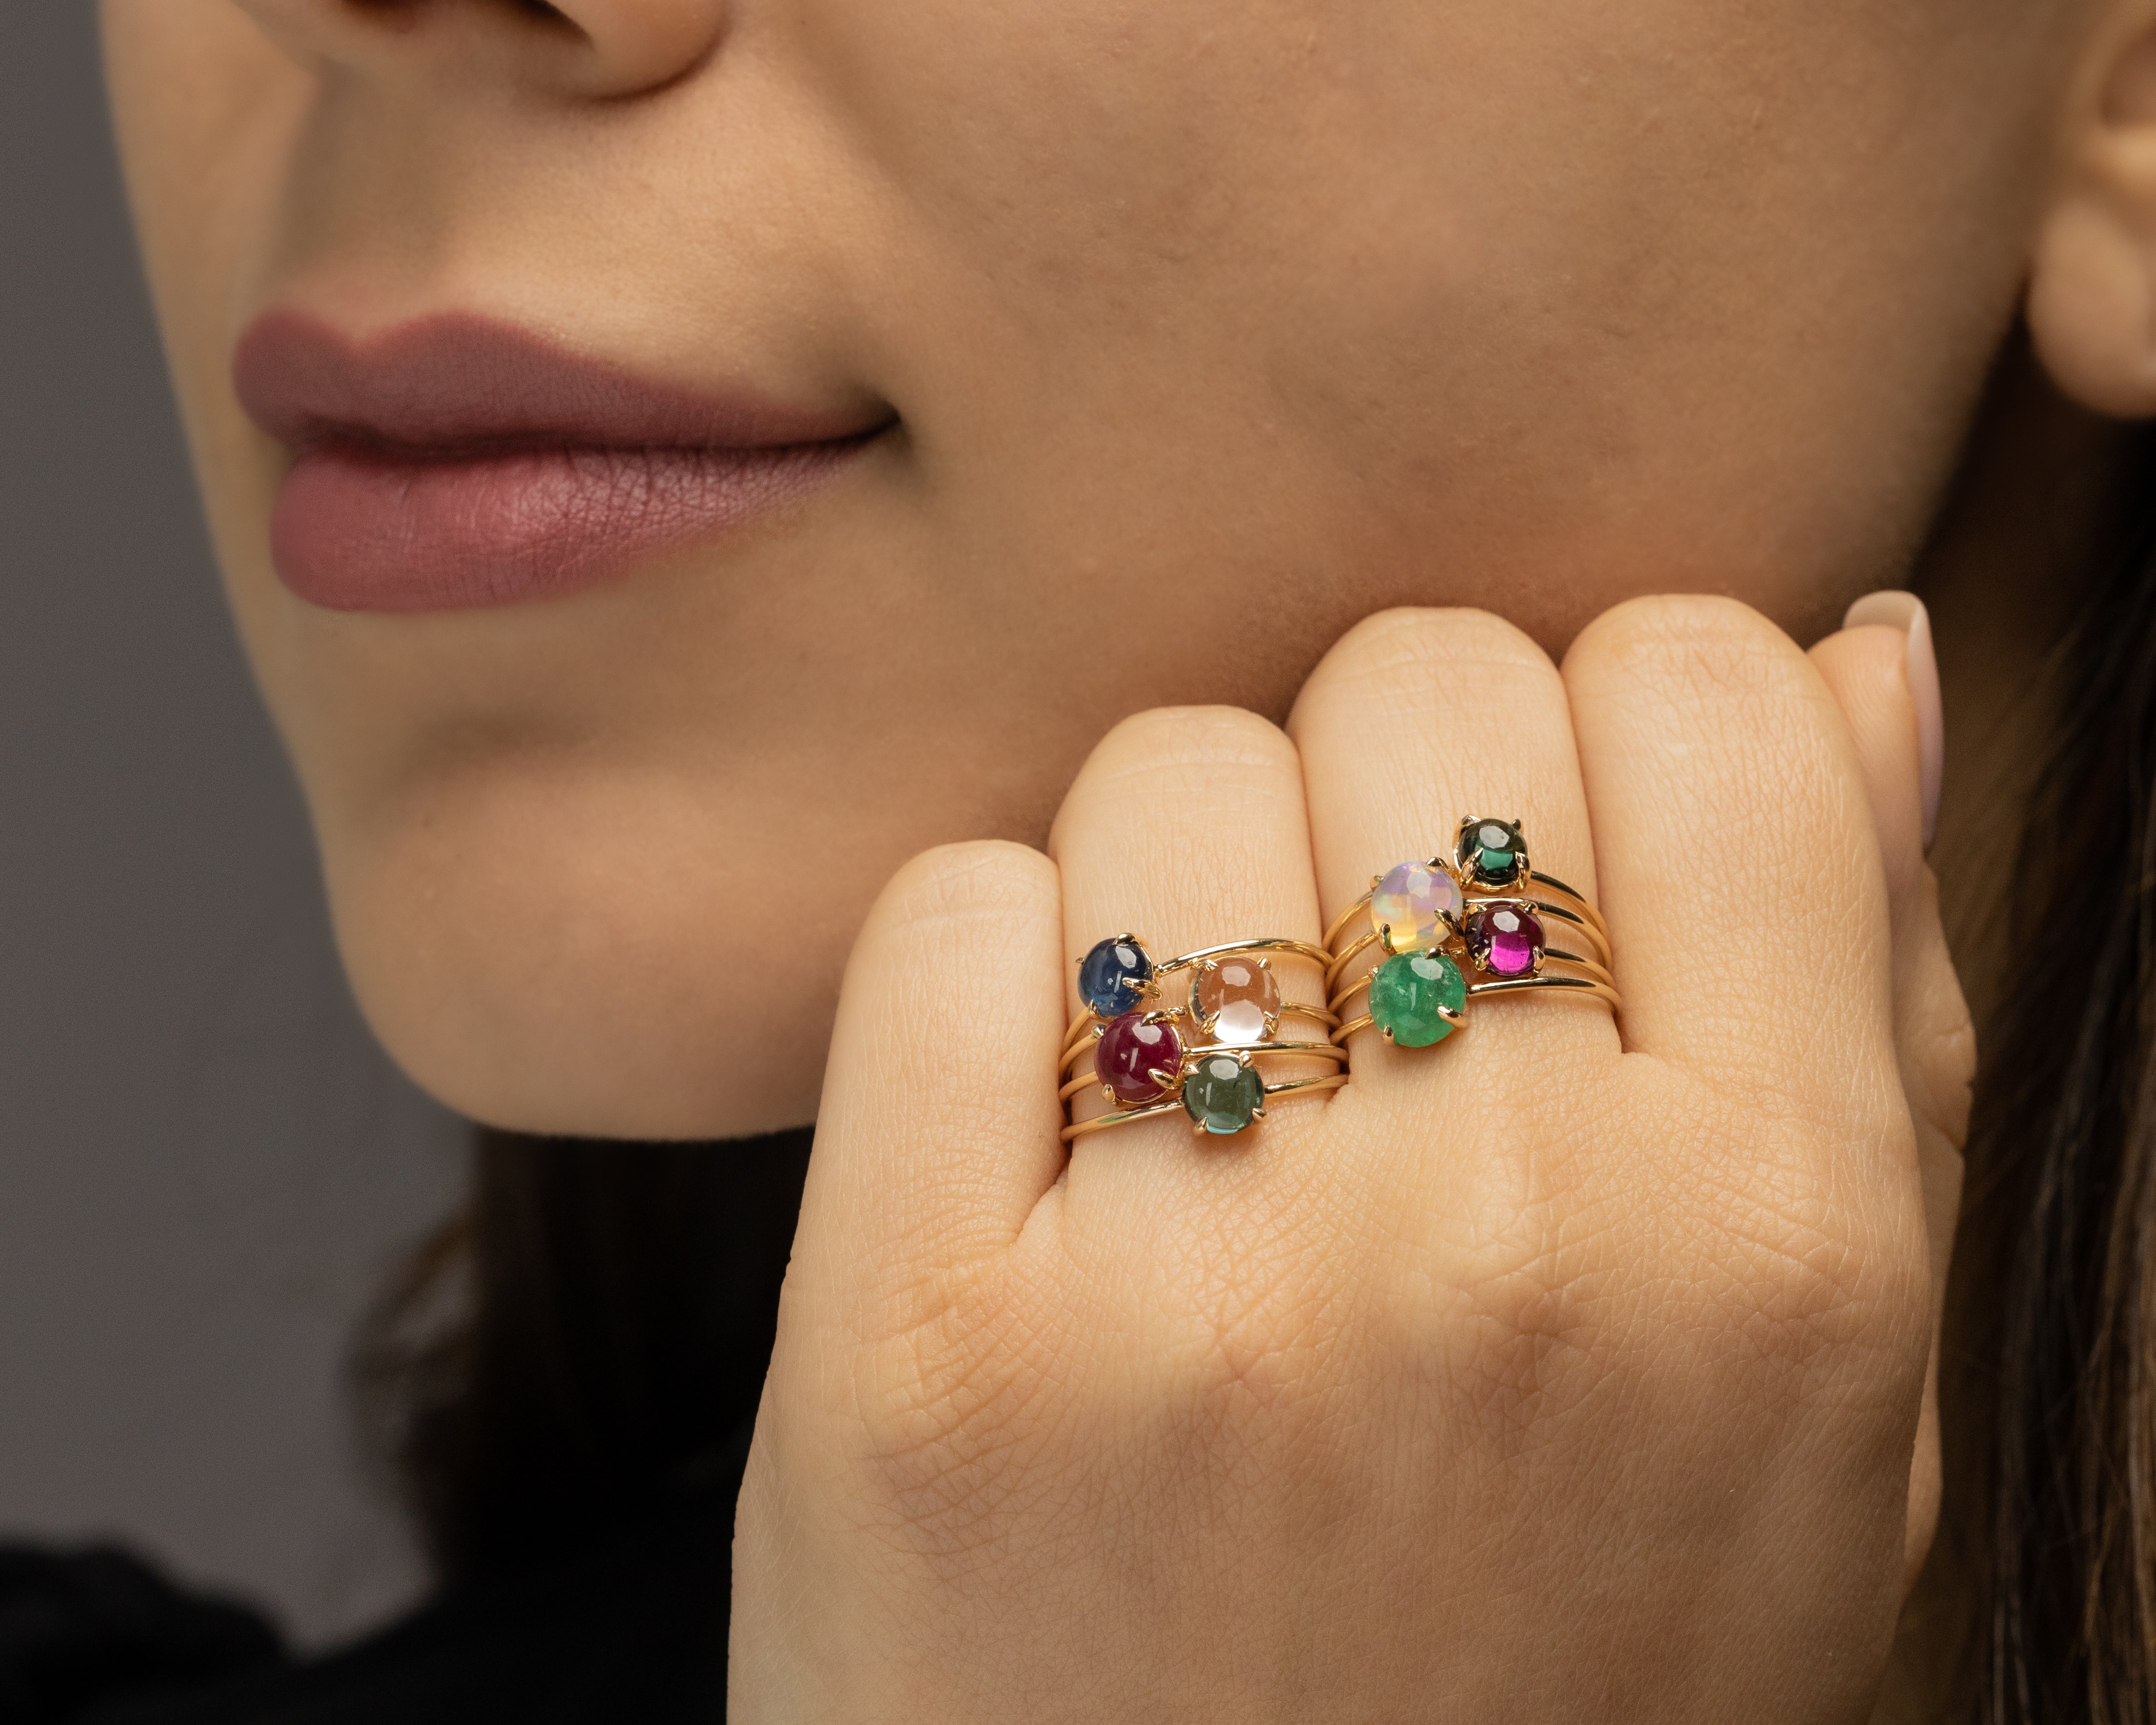 Starflower Jewelry's Microstackable Rings featuring Natural Cabochon-Cut Colored Stones